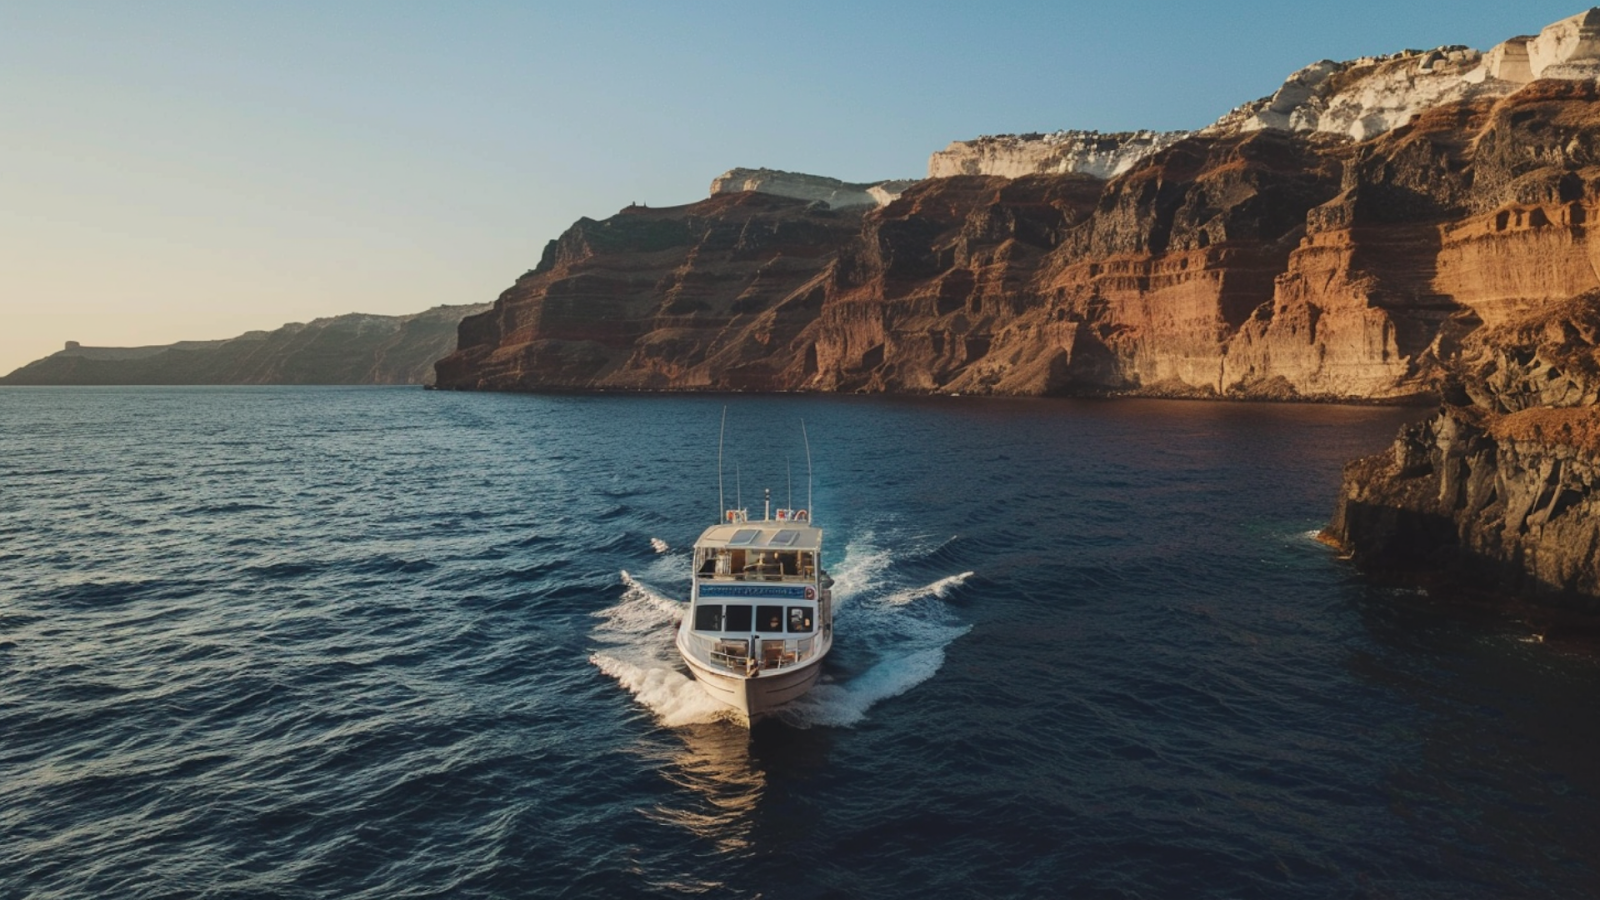 A luxury boat cruising along the waters in Santorini